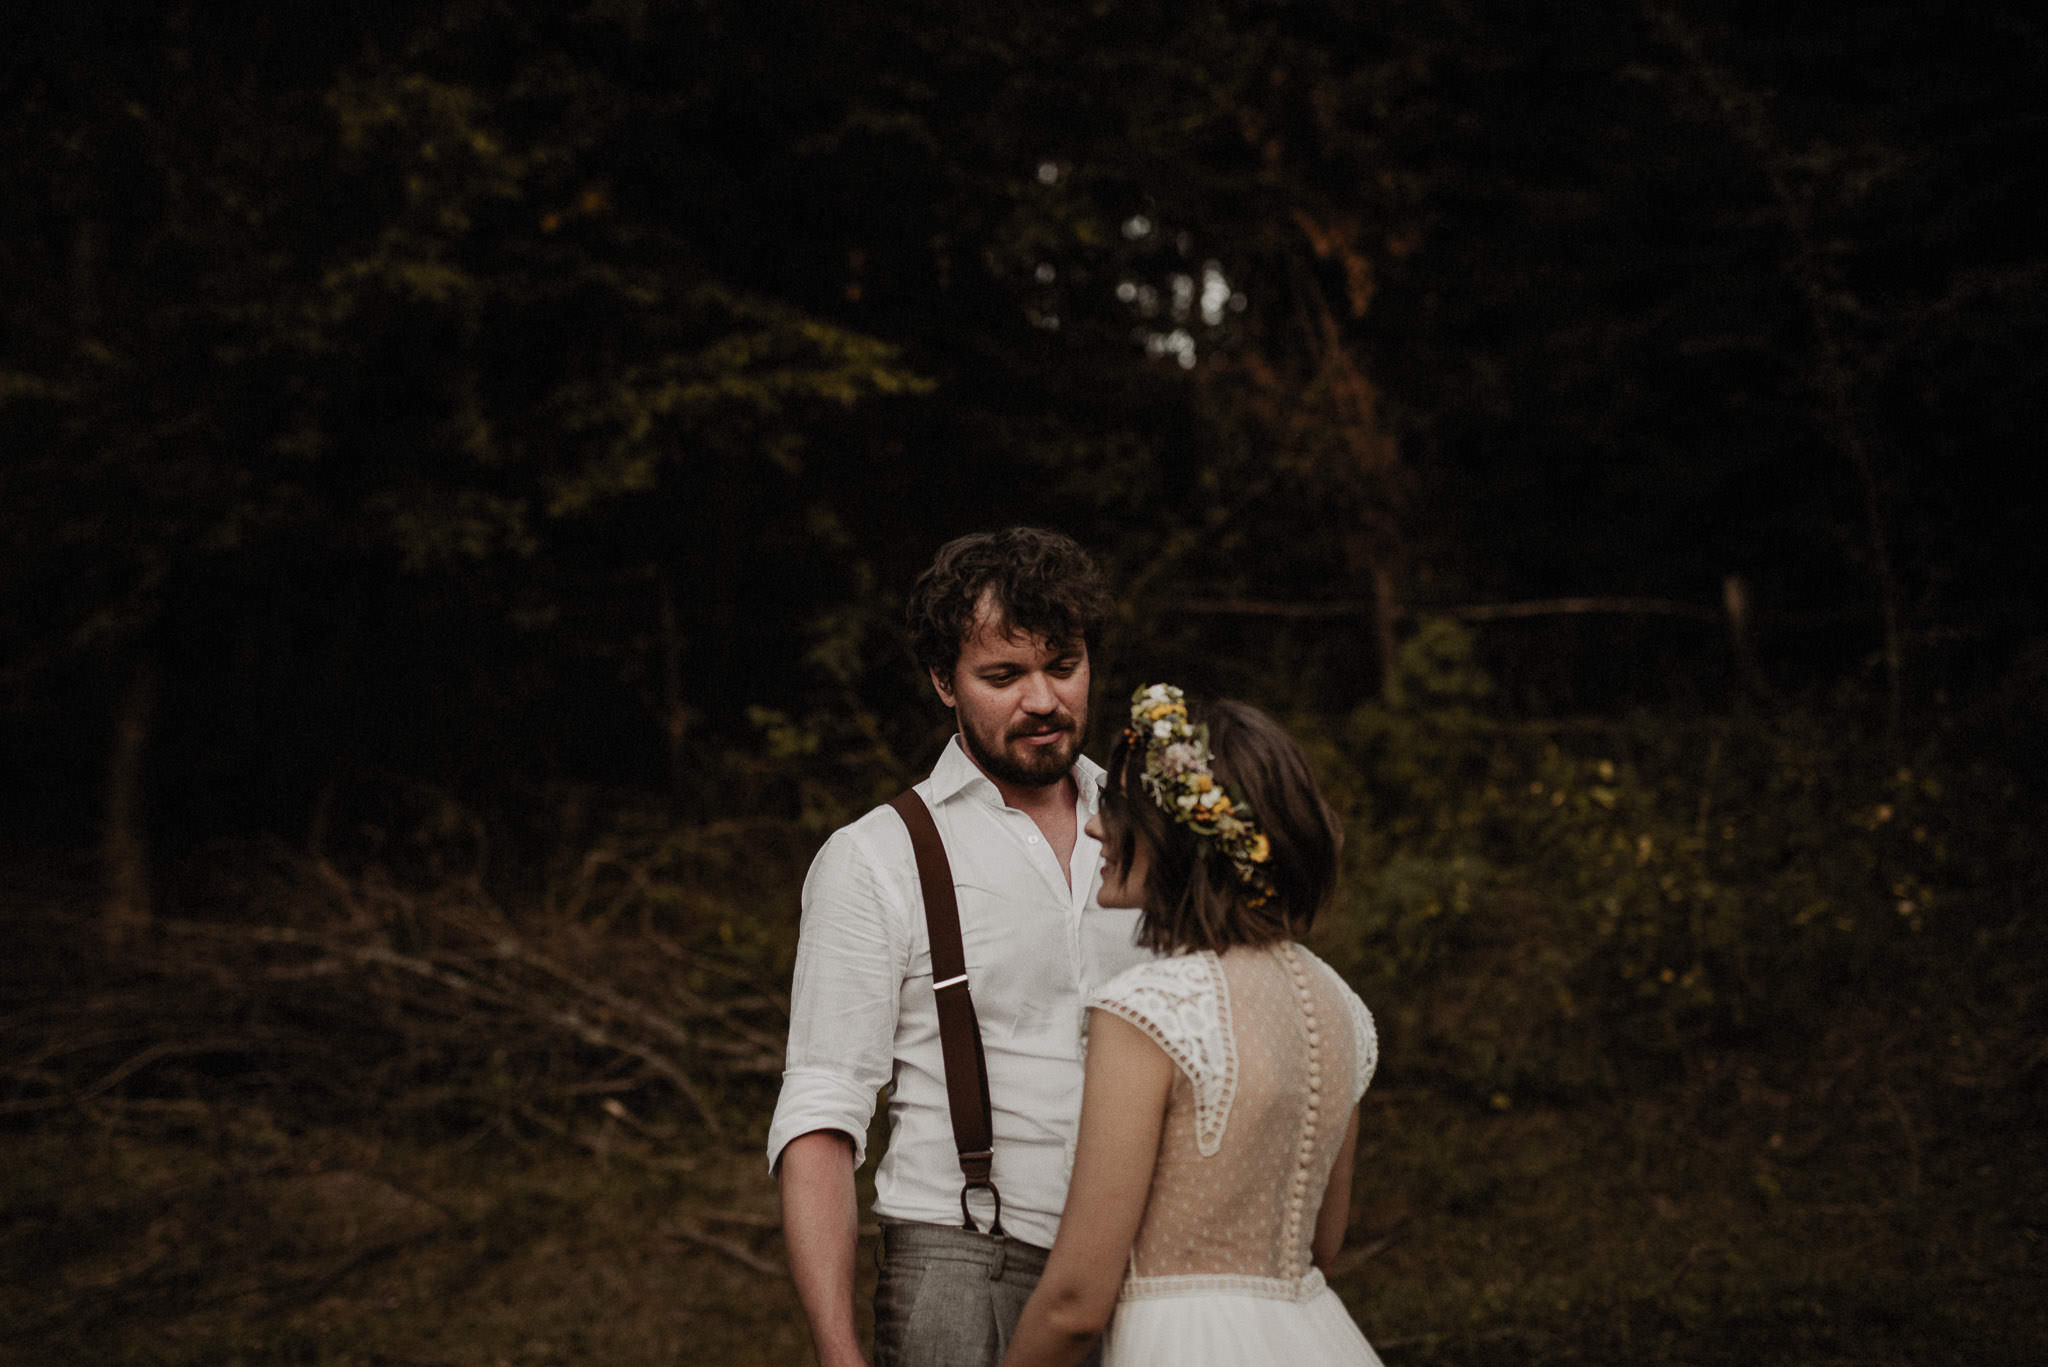 groom looking lovingly to his bride in the middle of nature